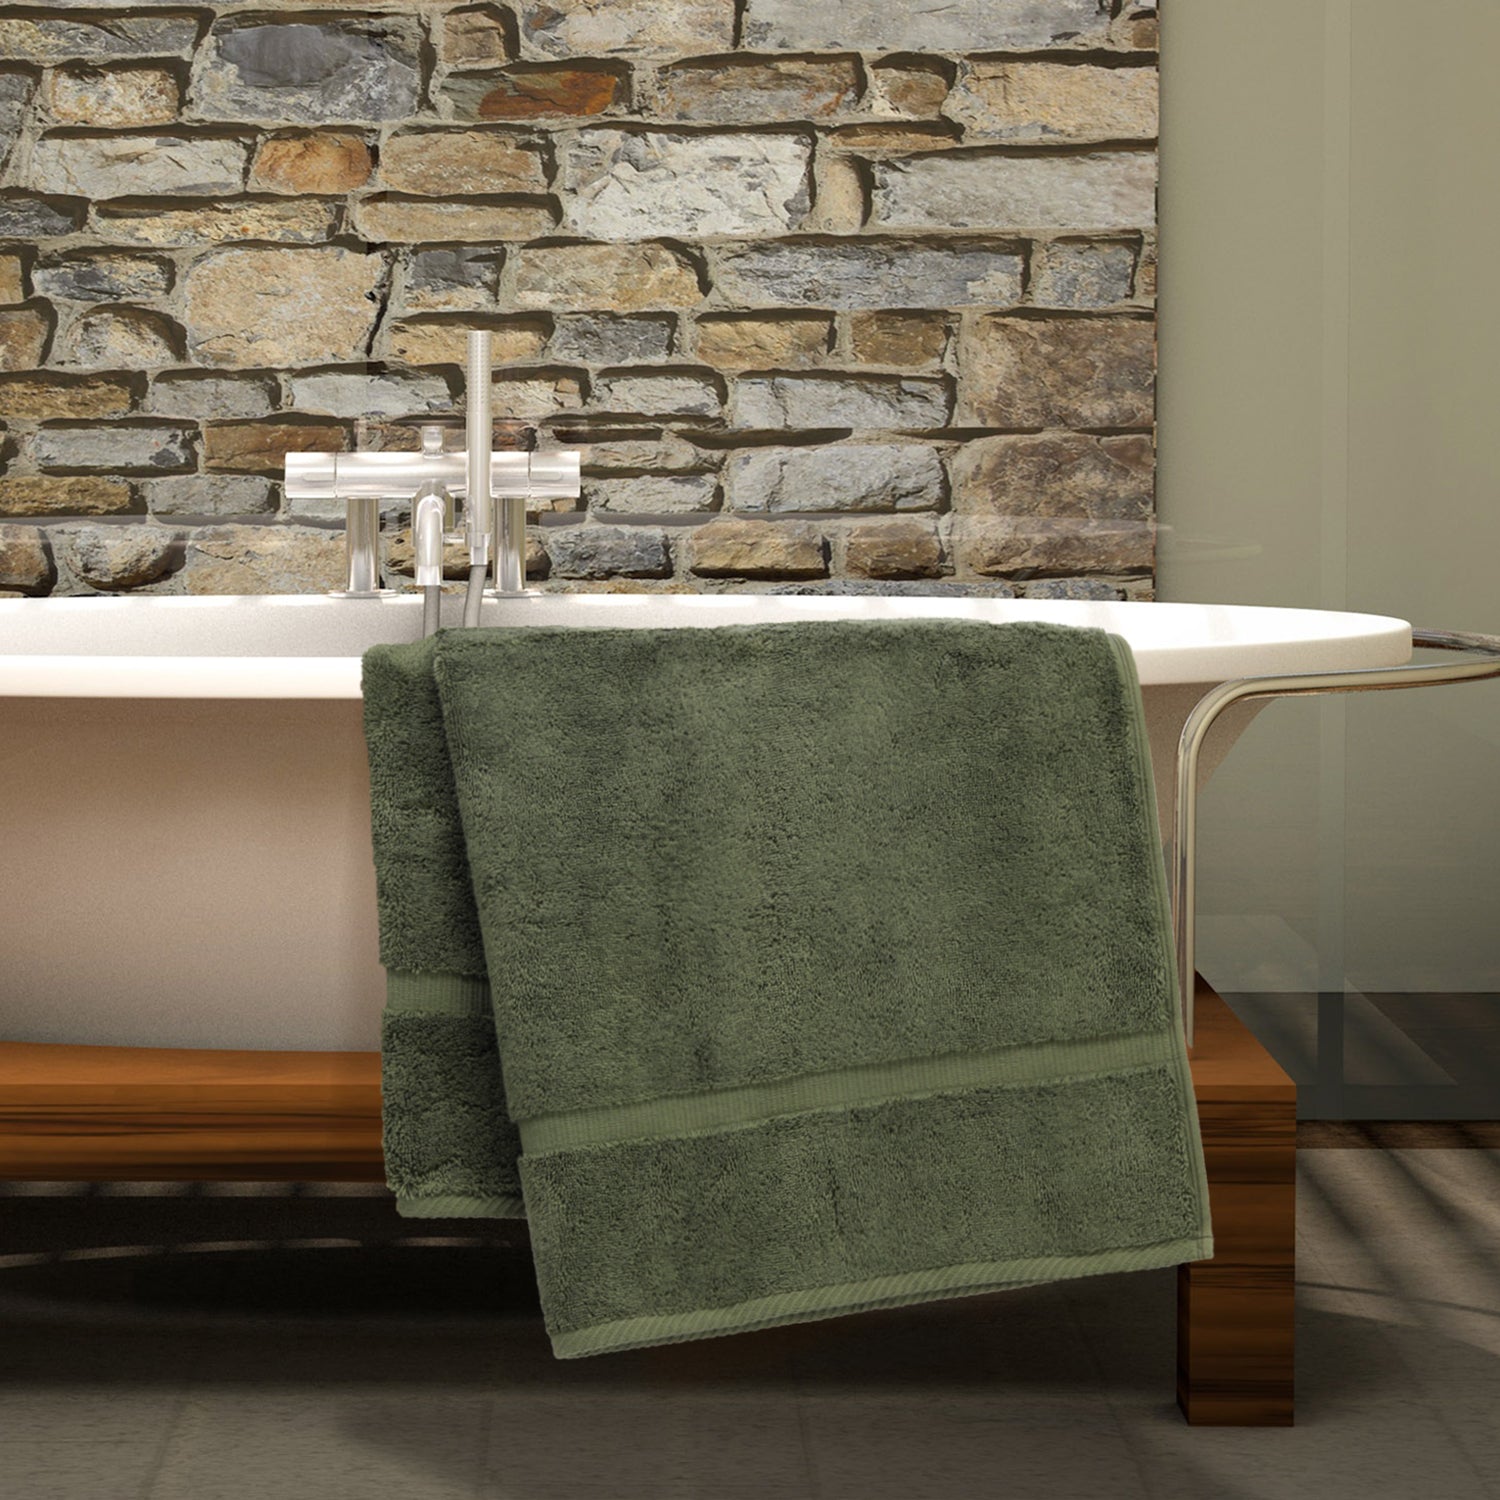 Large Green Luxury Cotton Bath Towels - 4 Pack Spa Hotel Bathroom, 30x56  Size